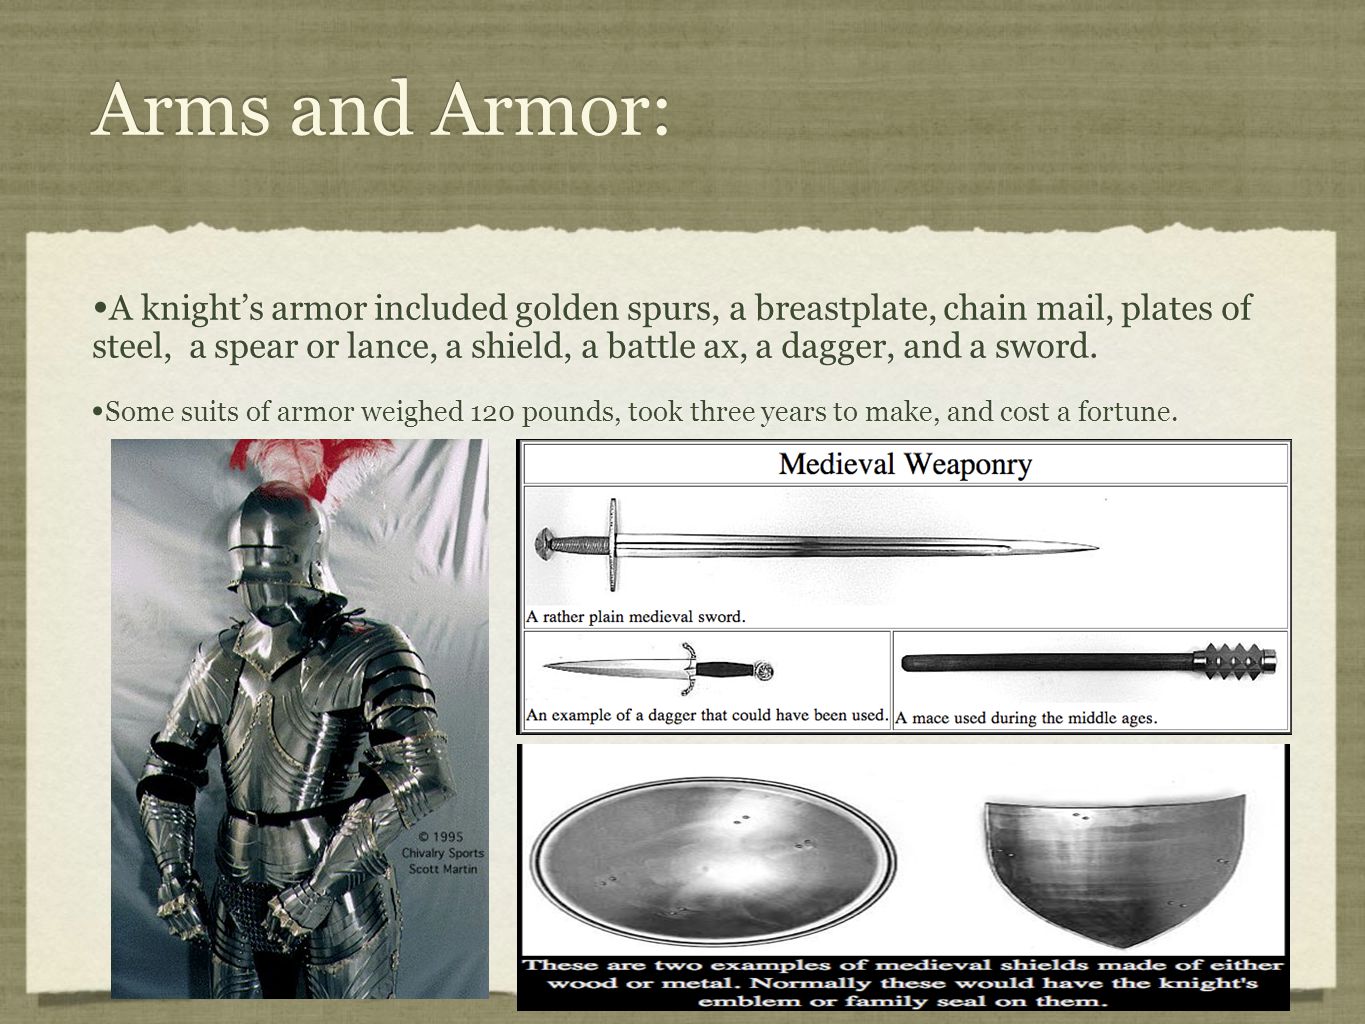 Arms and Armor: A knight’s armor included golden spurs, a breastplate, chain mail, plates of steel, a spear or lance, a shield, a battle ax, a dagger, and a sword.